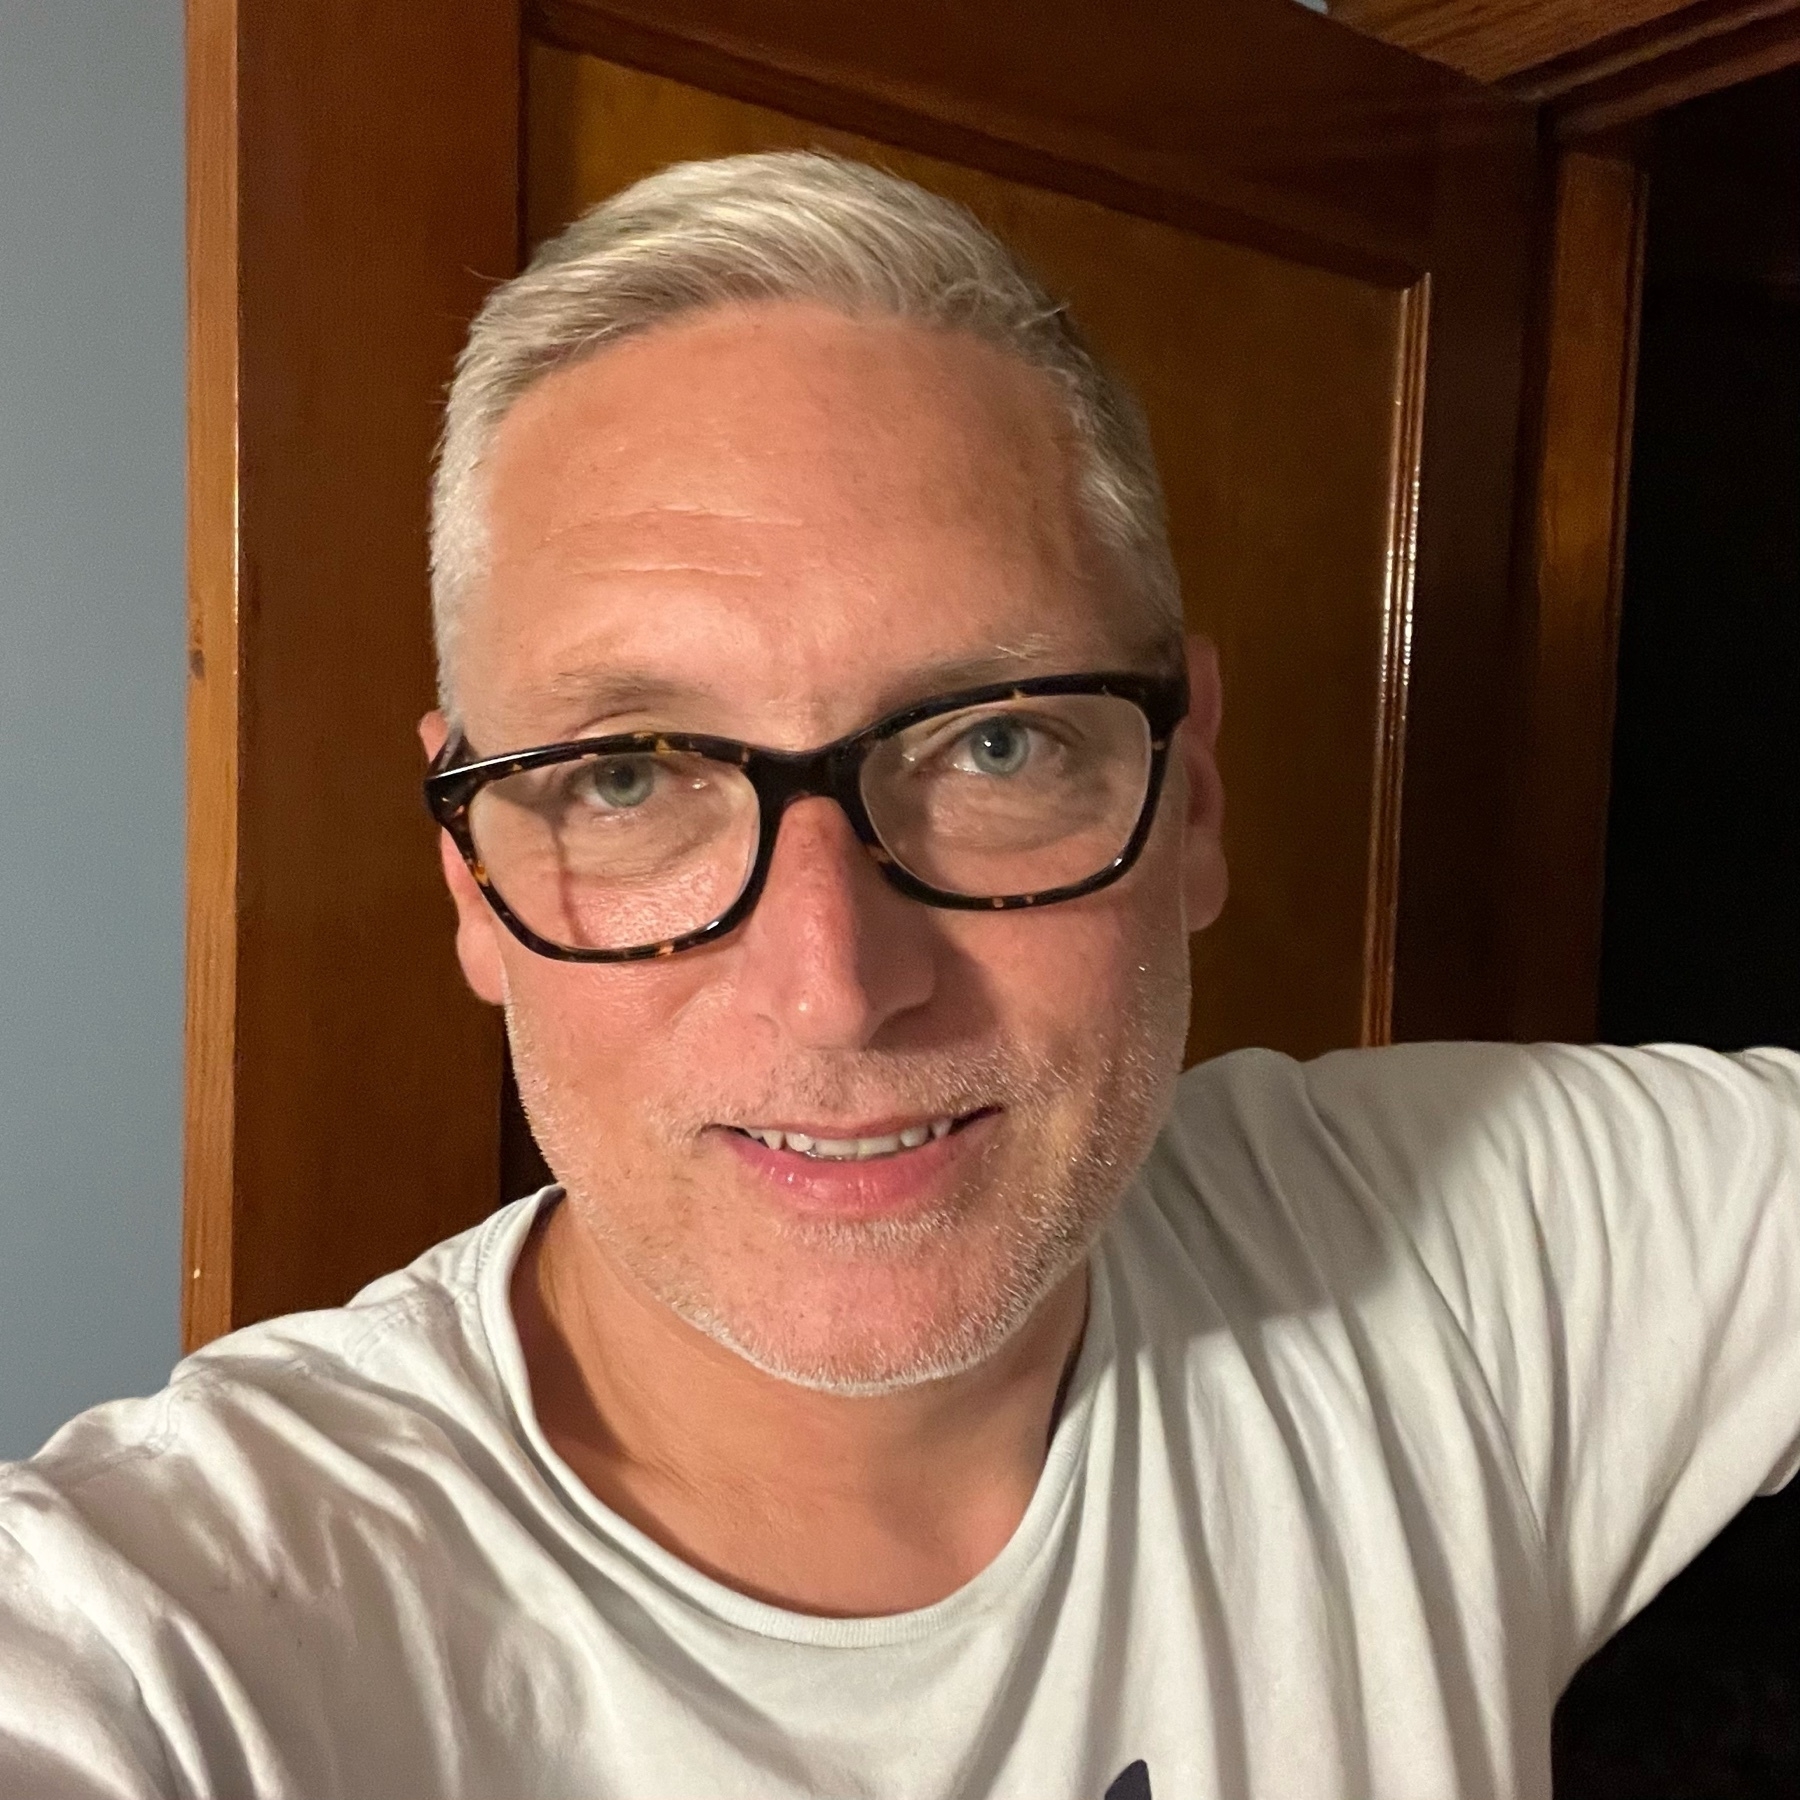 Selfie of me, a Caucasian 48 year old man with short gray hair, glasses, and a light blue t-shirt